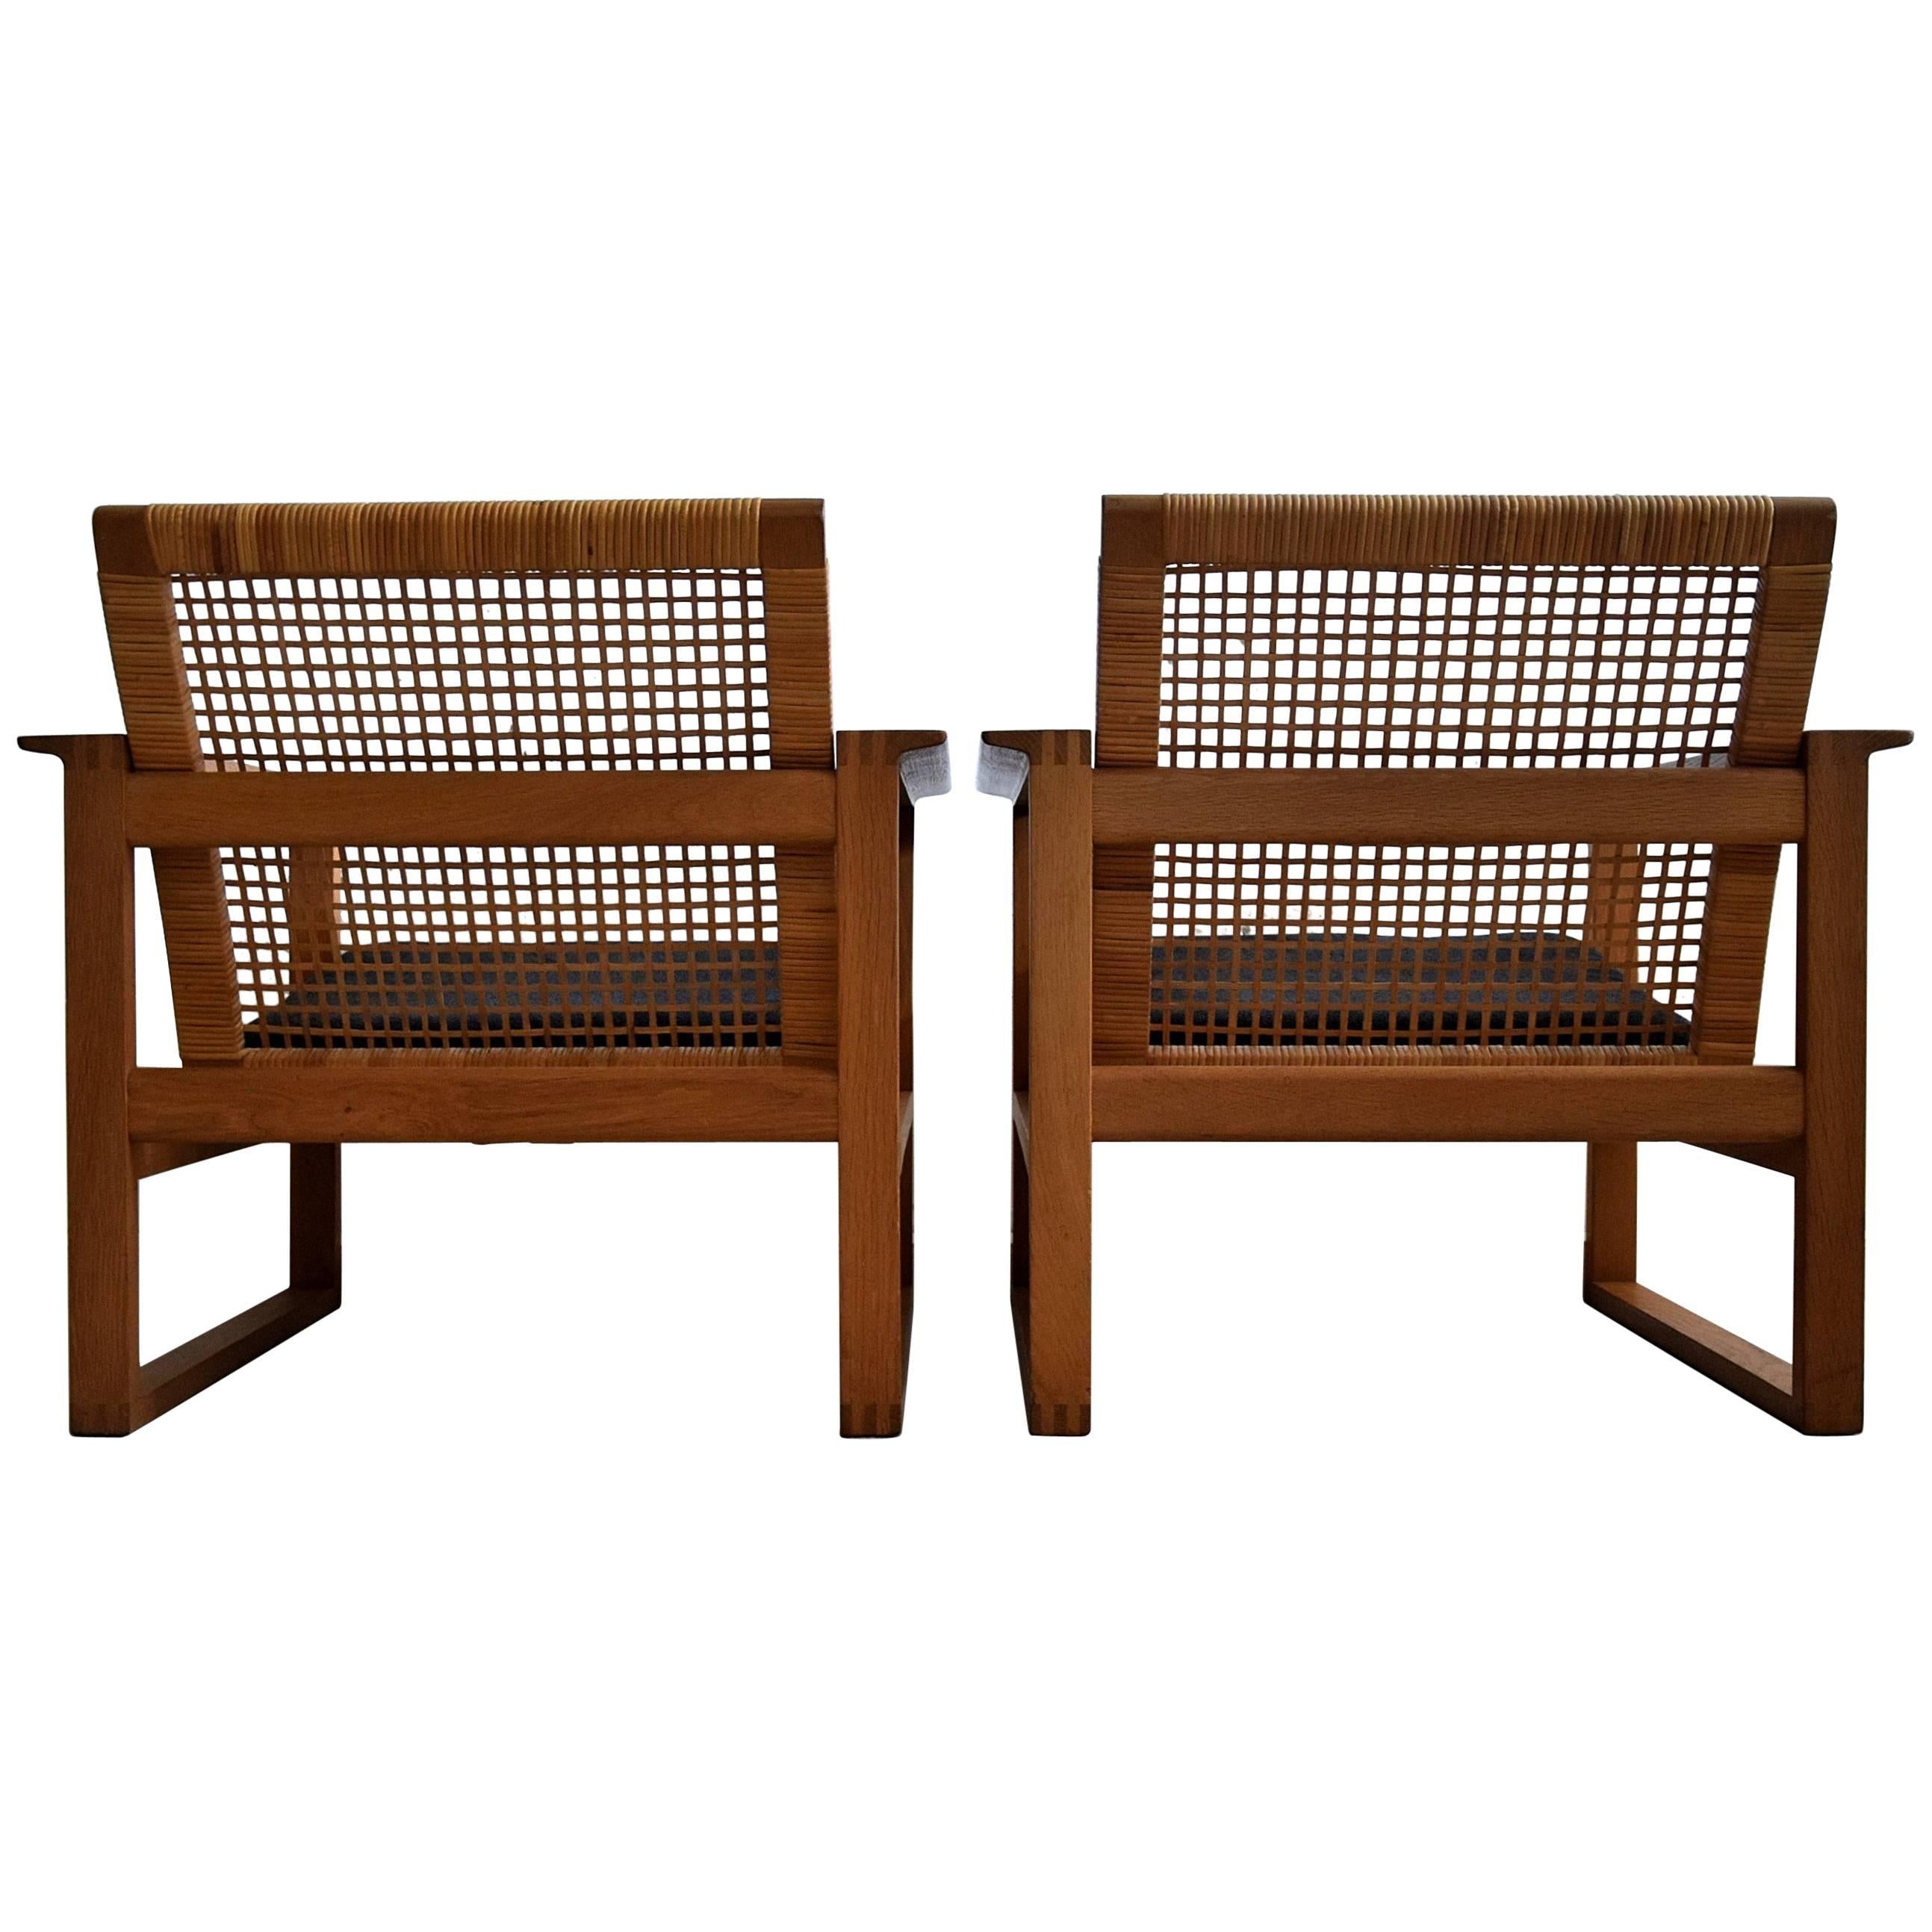 Børge Mogensen Mid-Century Modern Pair of Oak and Cane Lounge Chairs